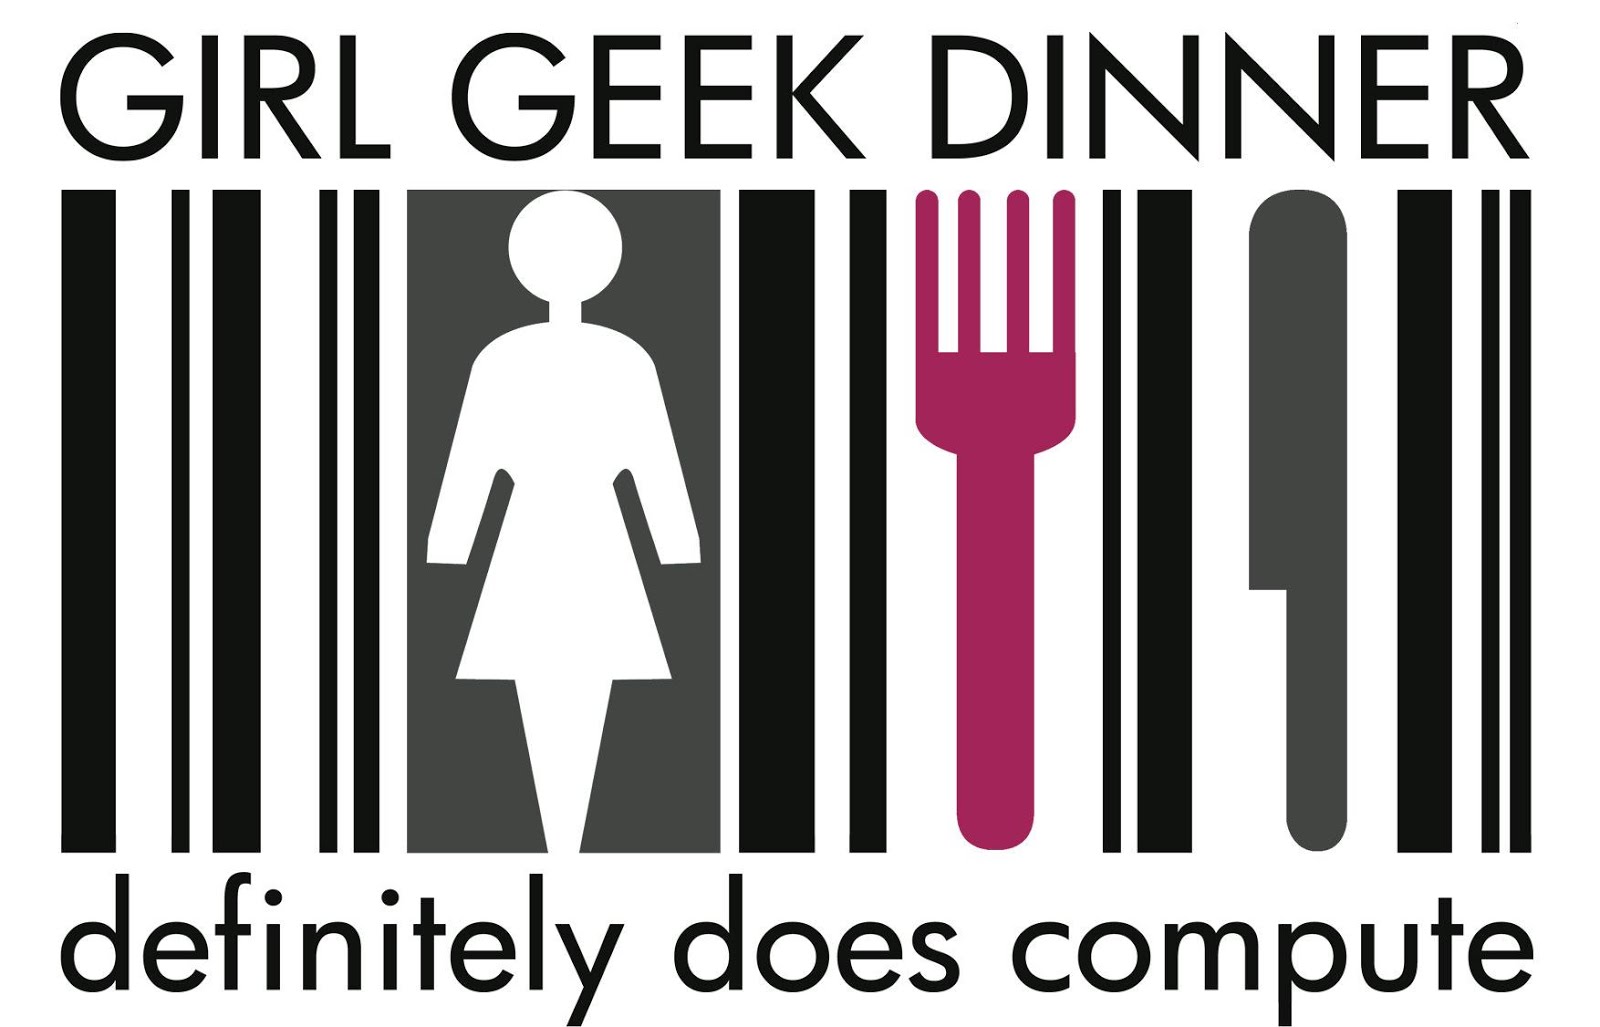 Geek insider, geekinsider, geekinsider. Com,, girl geek academy: on a mission to teach women to code, lady geek